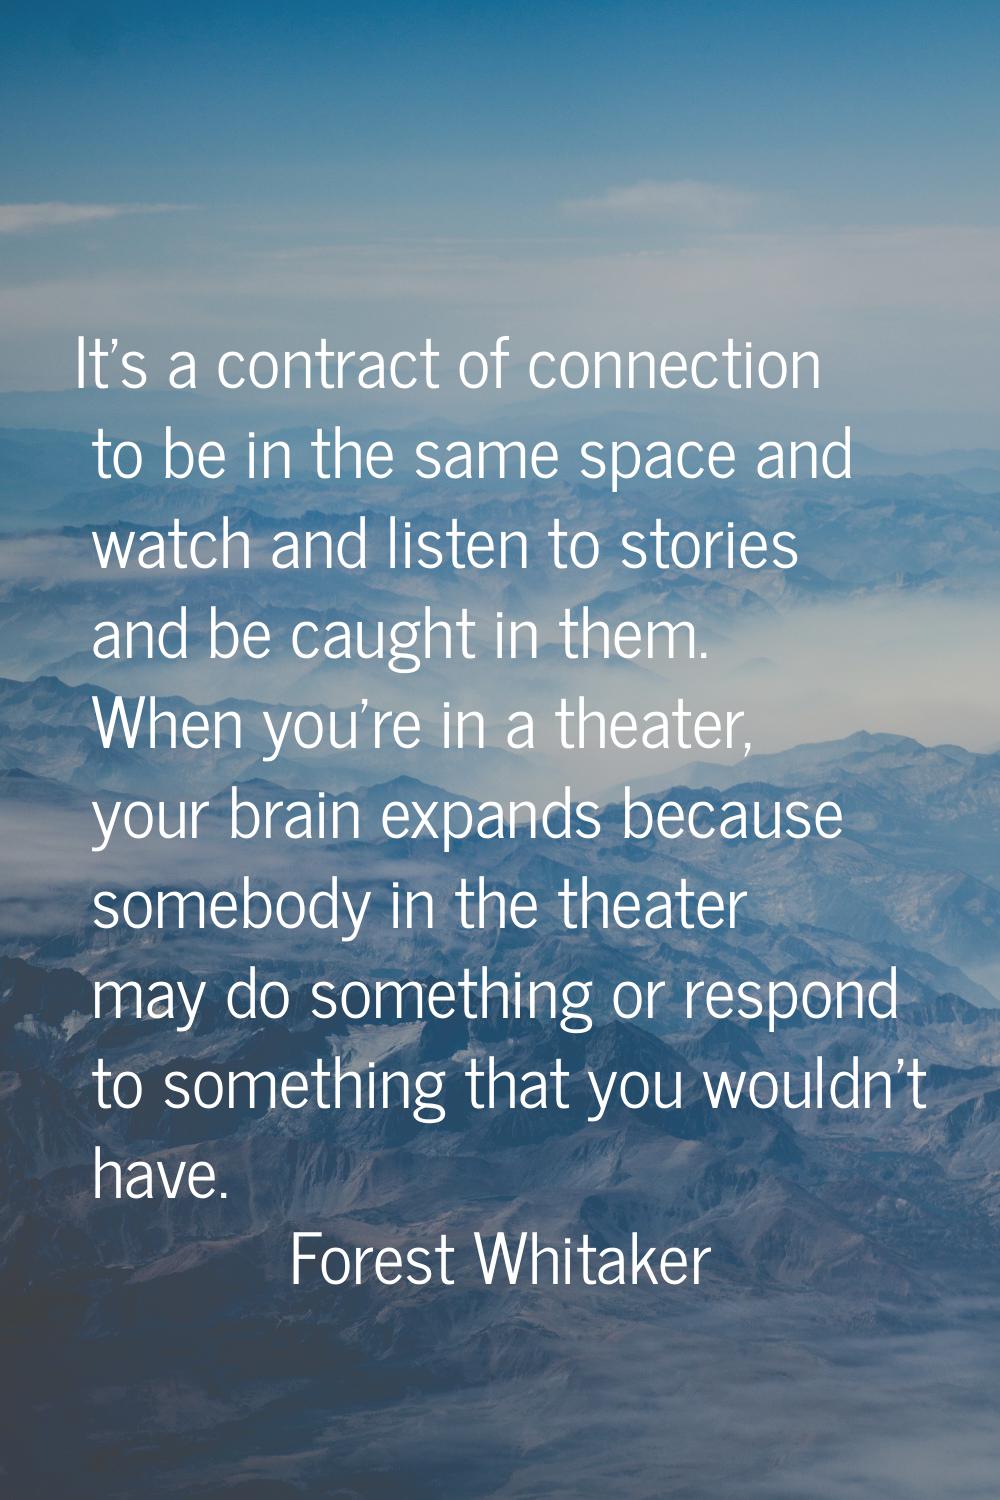 It's a contract of connection to be in the same space and watch and listen to stories and be caught